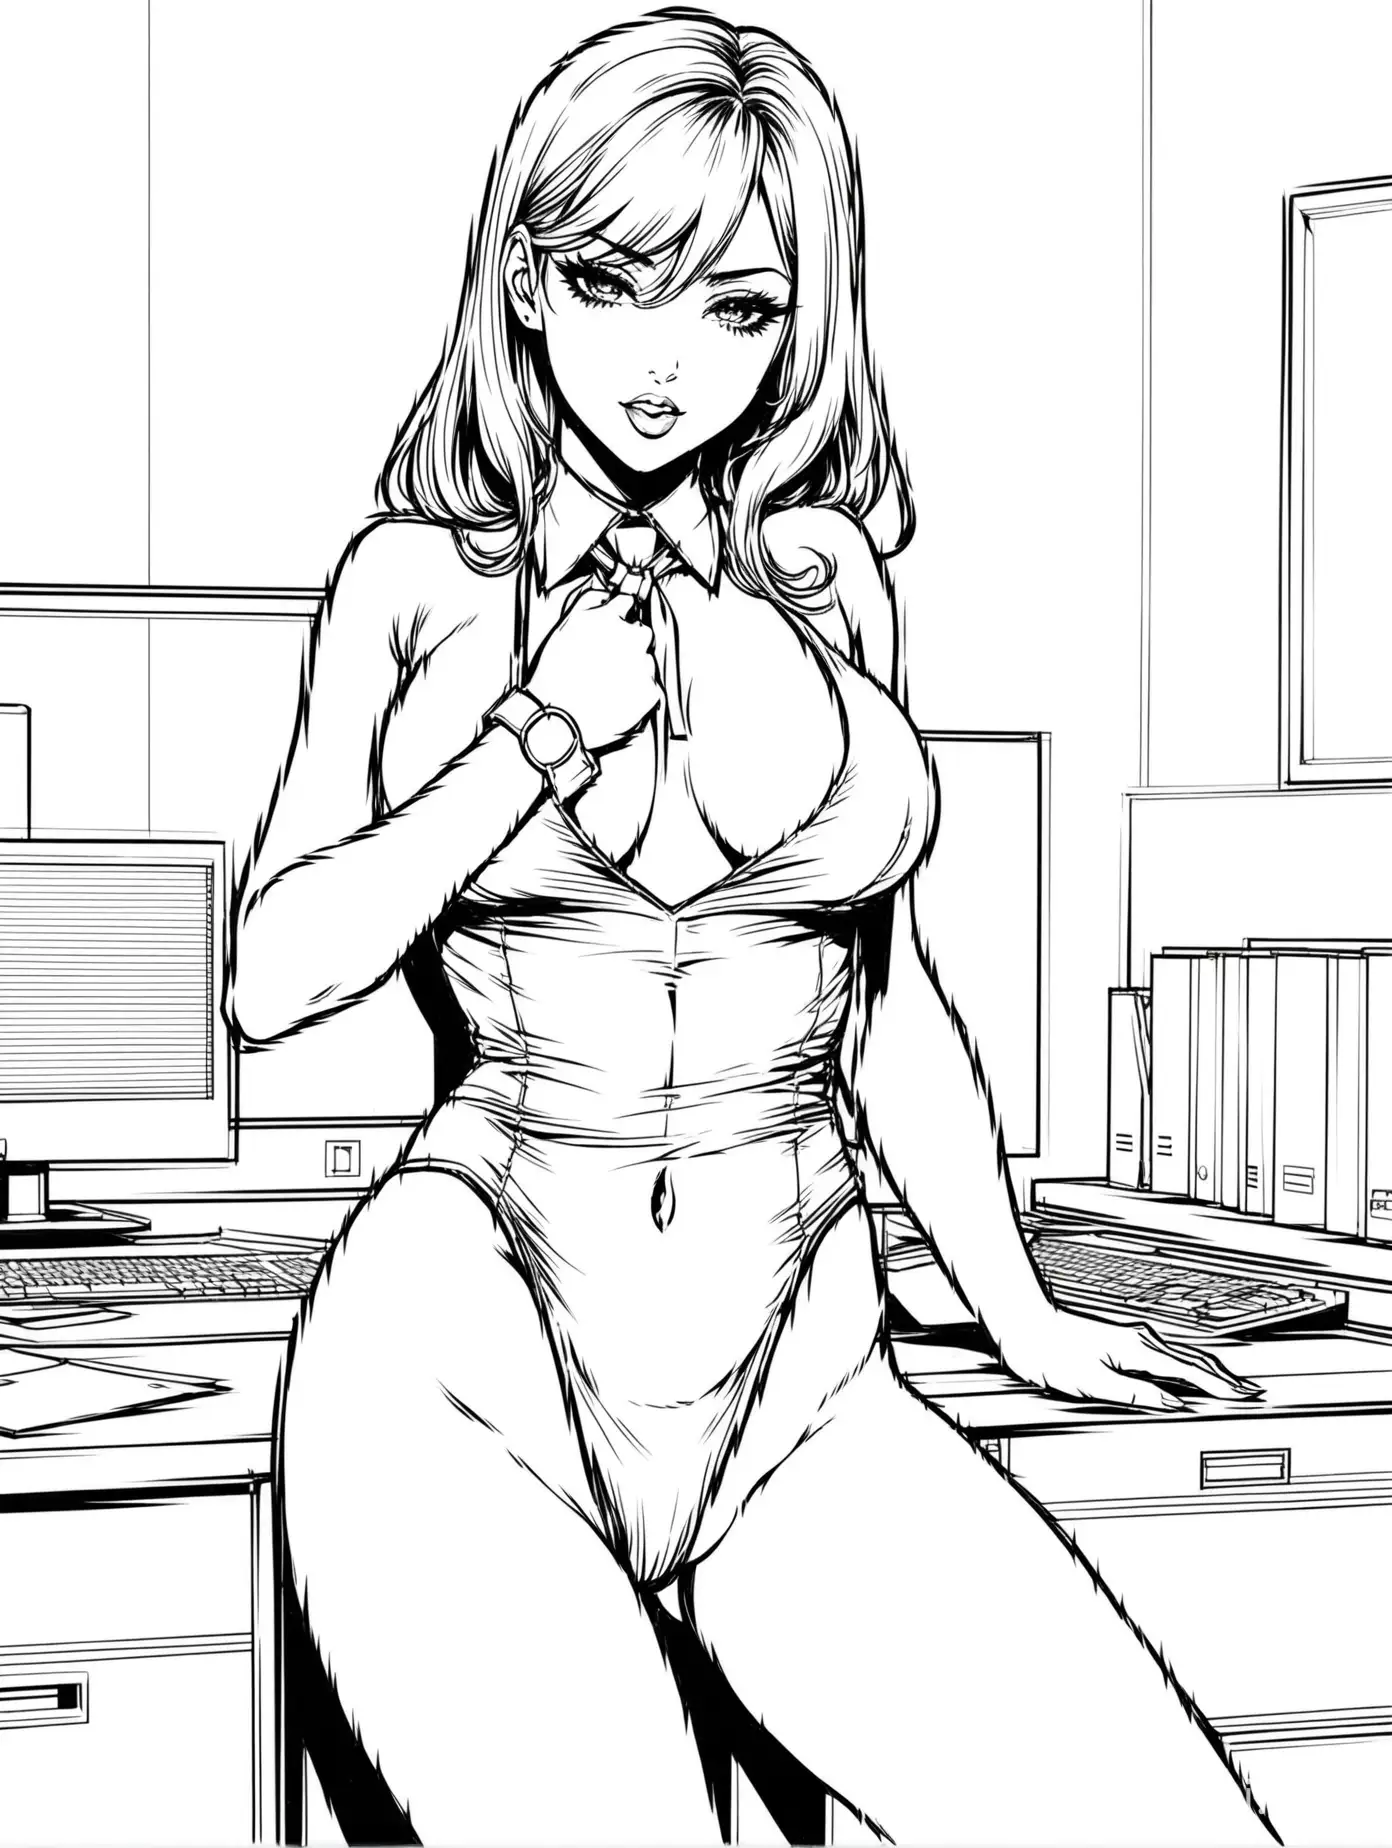 A black and white coloring page of a Seductive Office Girl wearing a revealing outfit, in a sexy pose